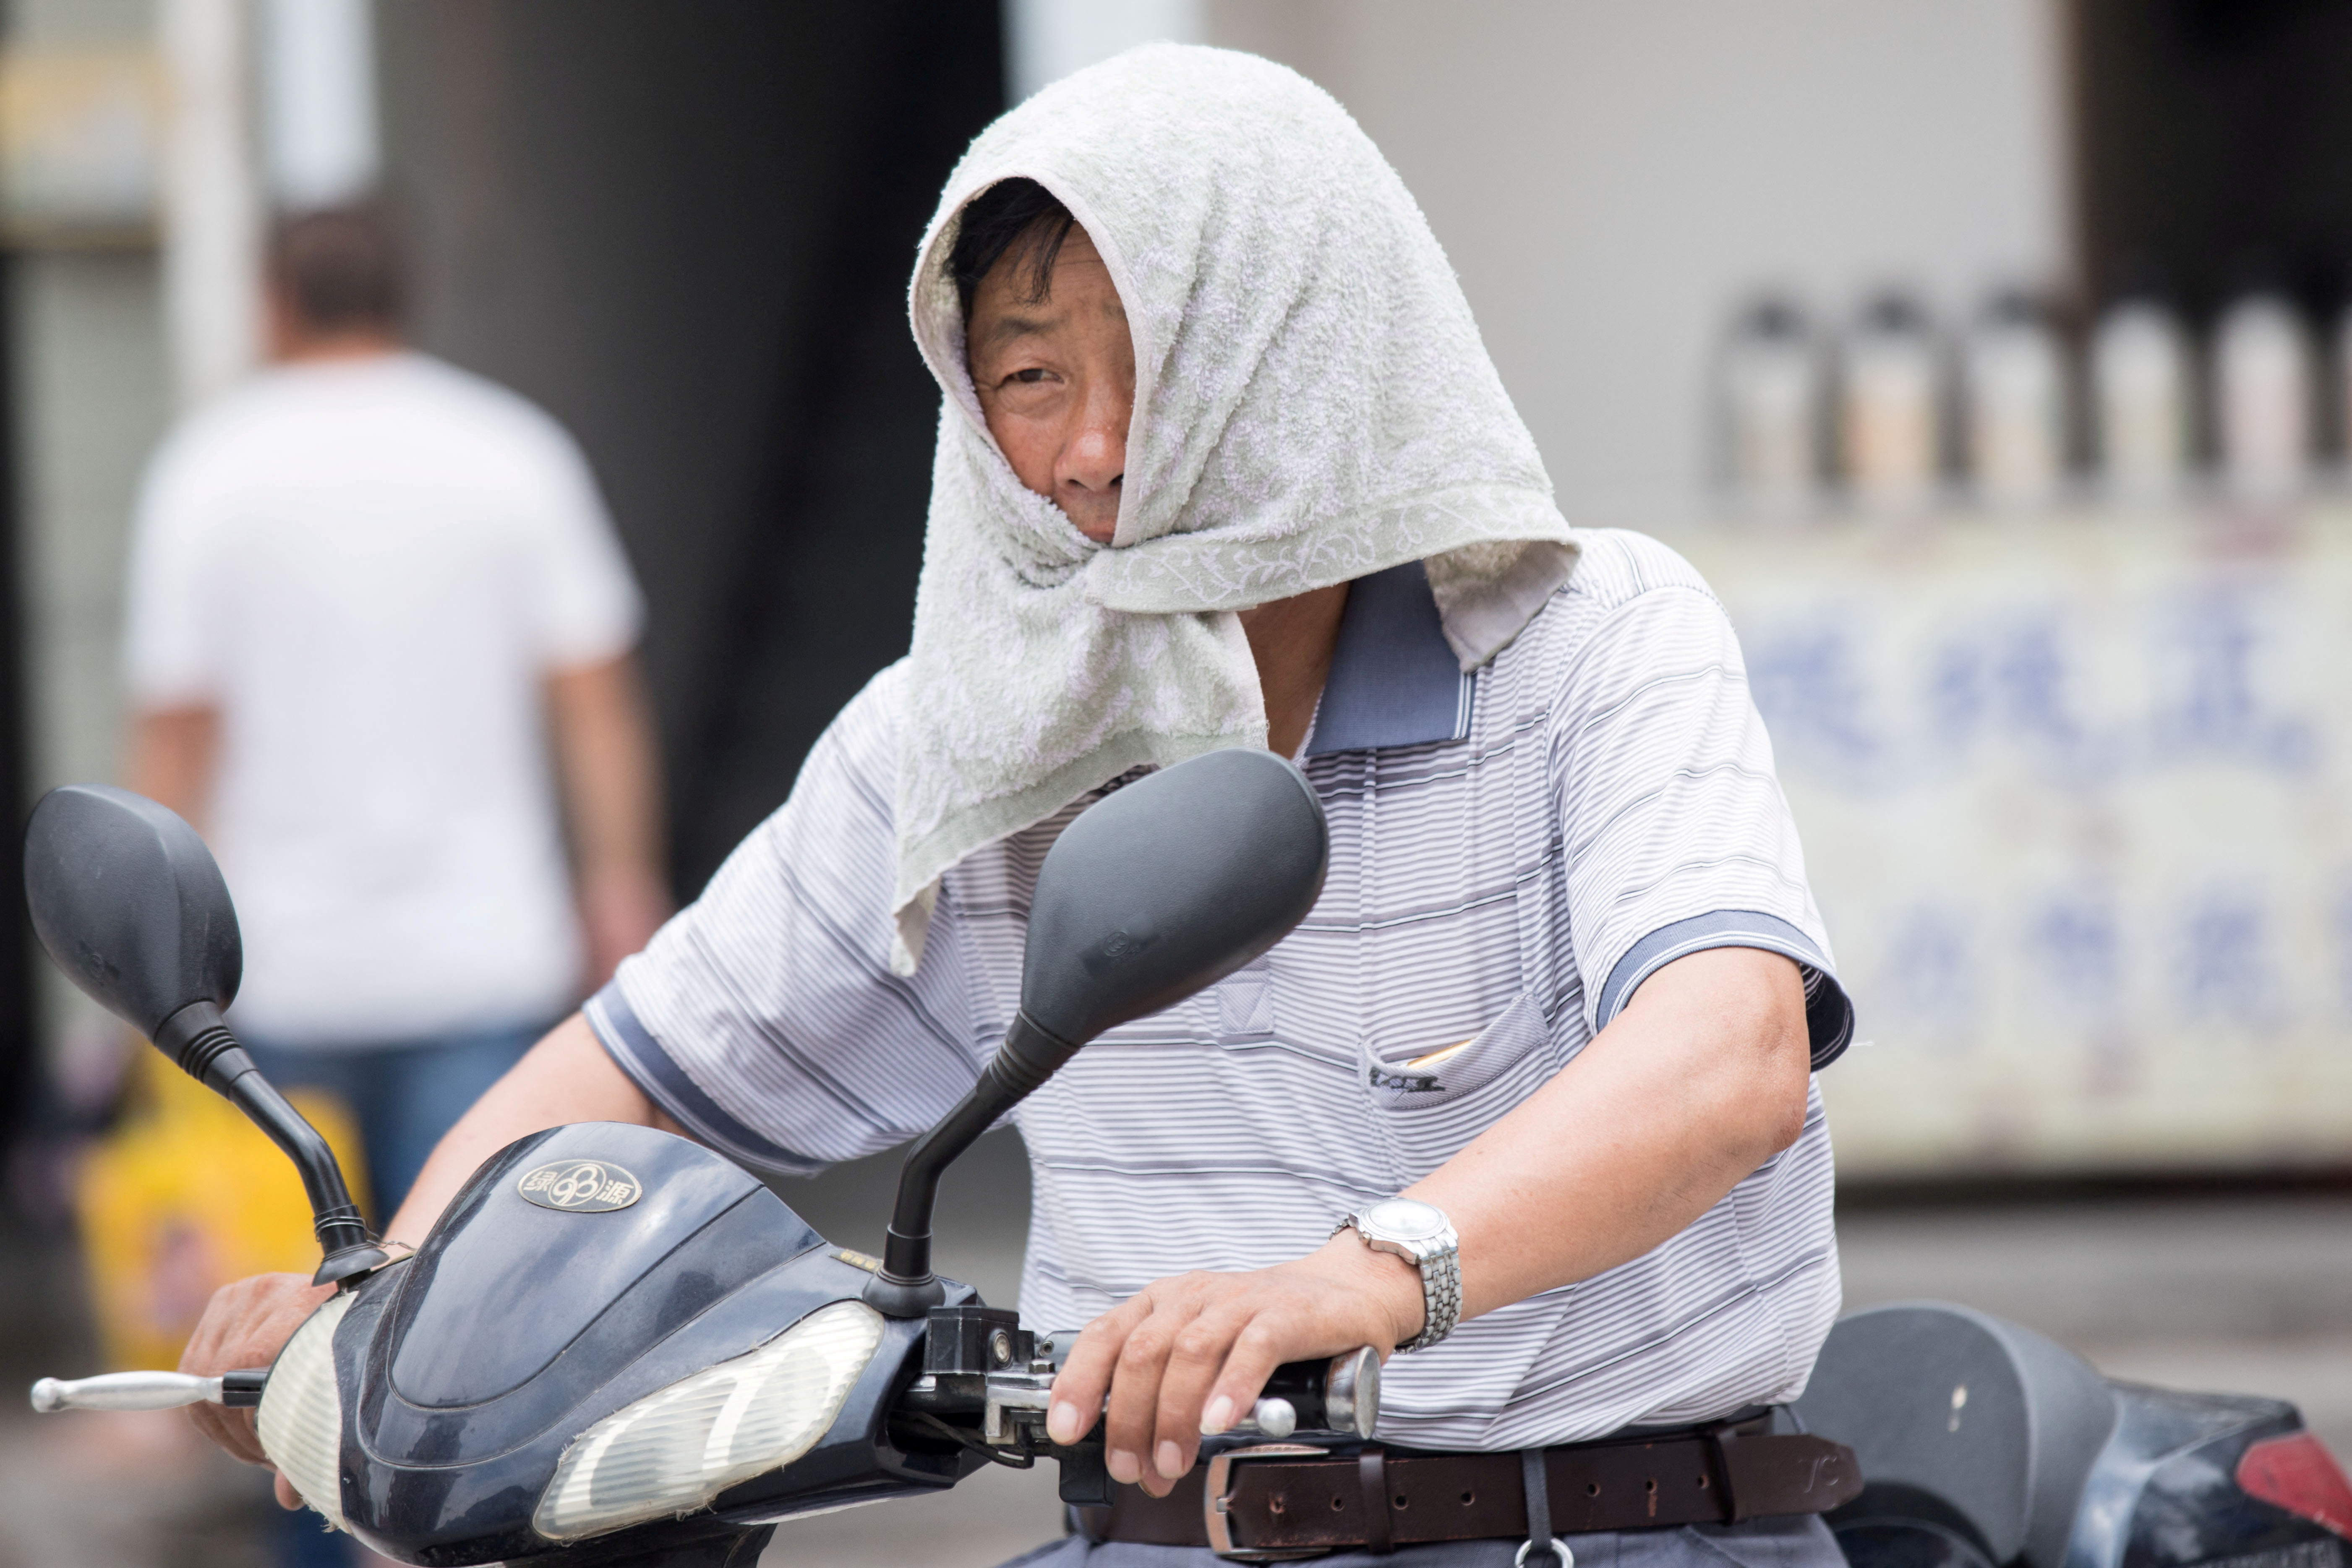 A man is seen with a towel tied around his head to escape hot weather as a heat wave hits Hangzhou